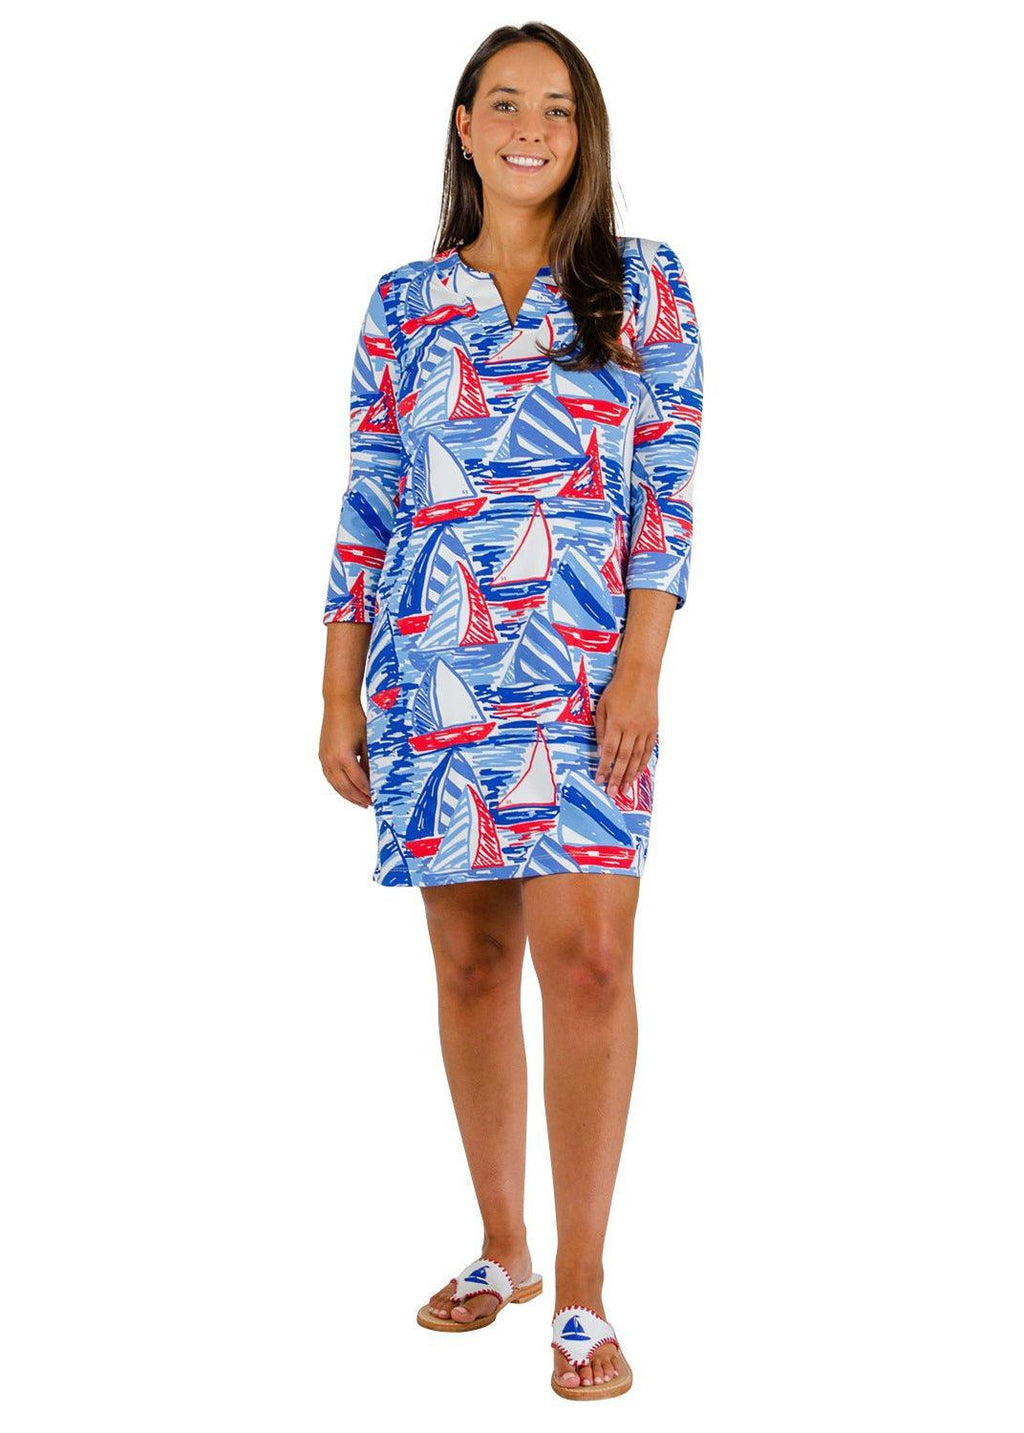 Lucille Dress 3/4 - Out for Sail Red/White/Blue